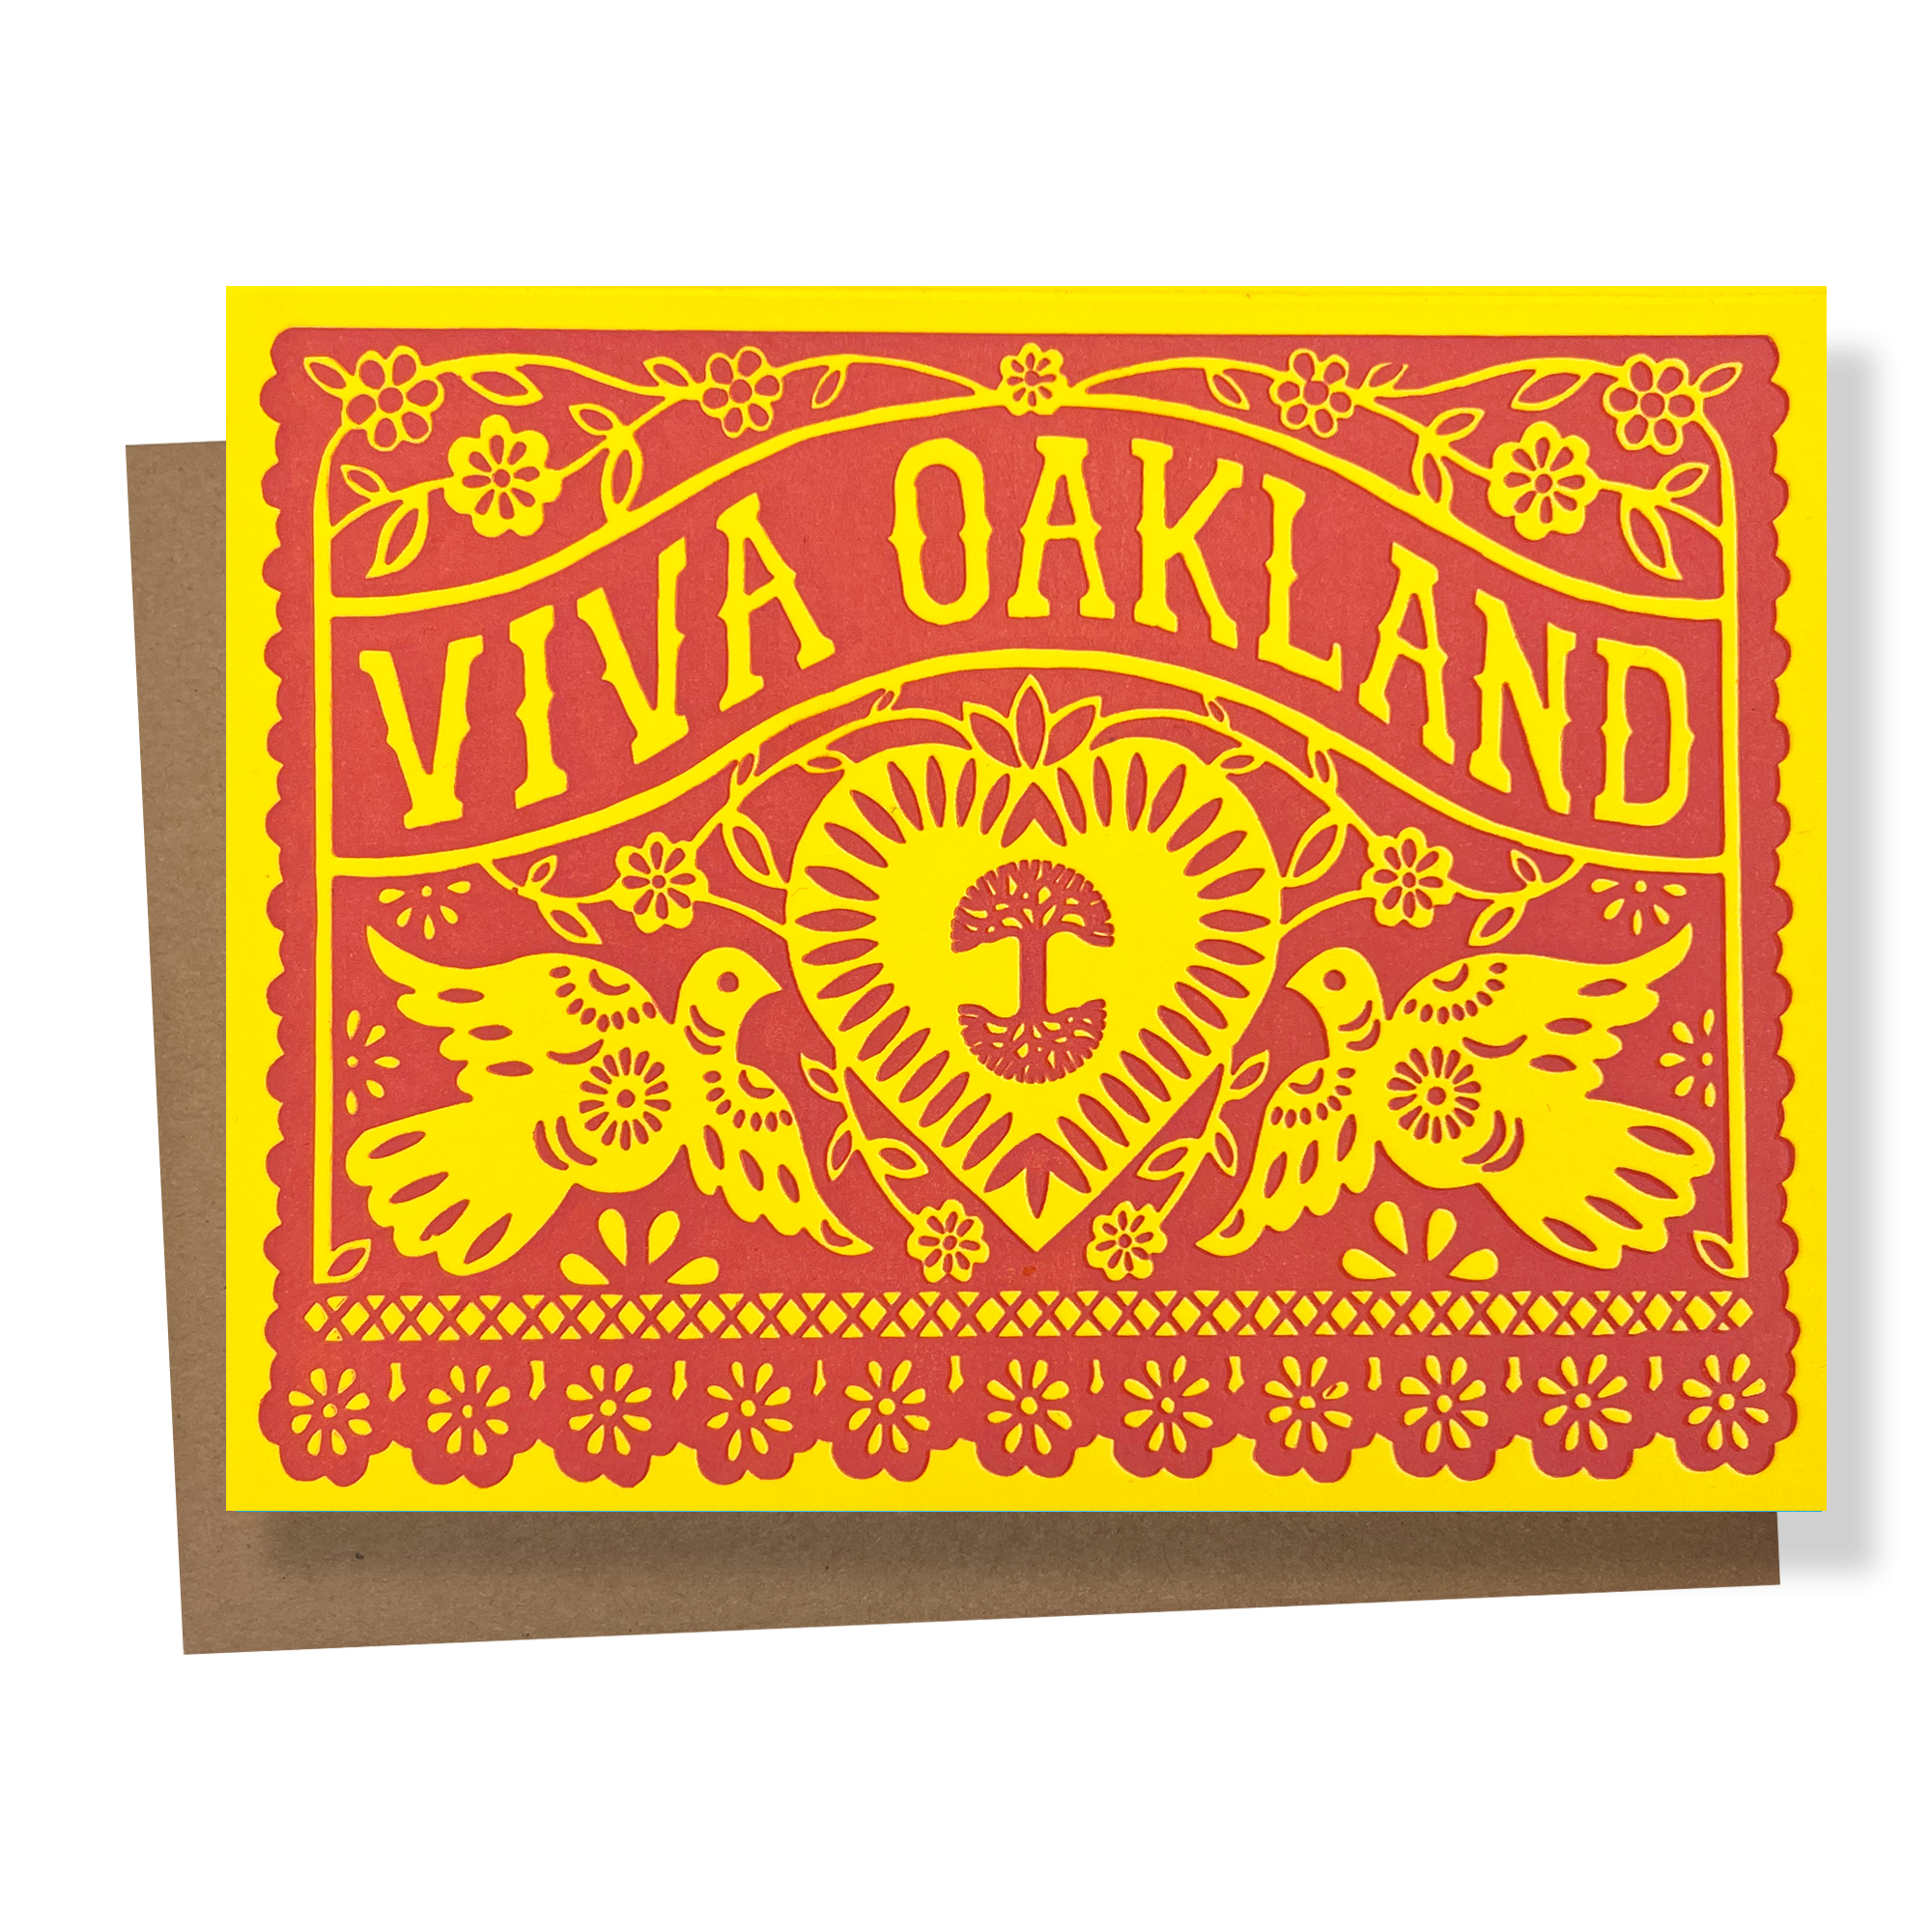 Red and yellow VIVA OAKLAND greeting card with brown envelope.